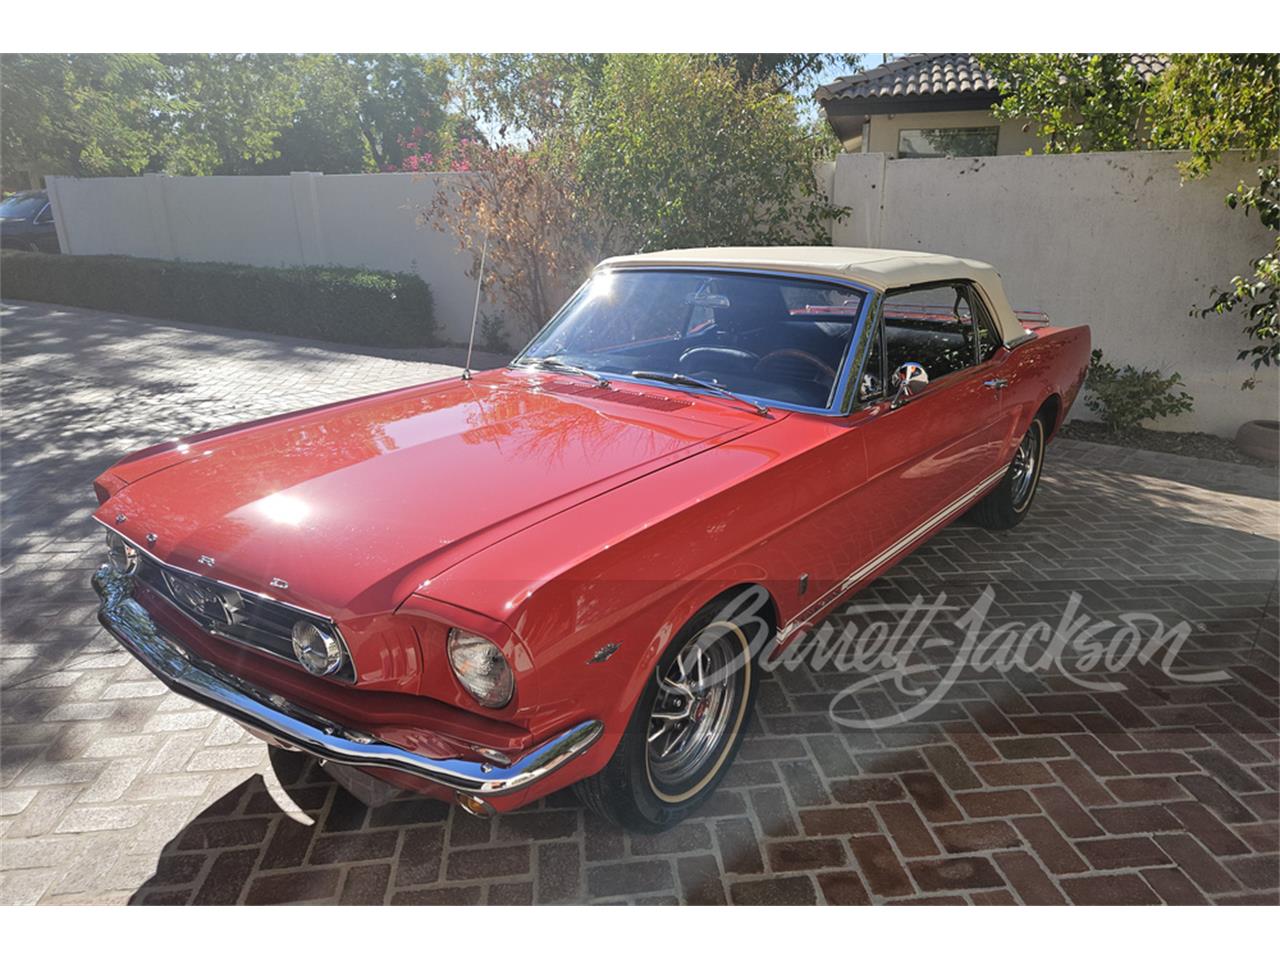 For Sale at Auction: 1965 Ford Mustang in Scottsdale, Arizona for sale in Scottsdale, AZ